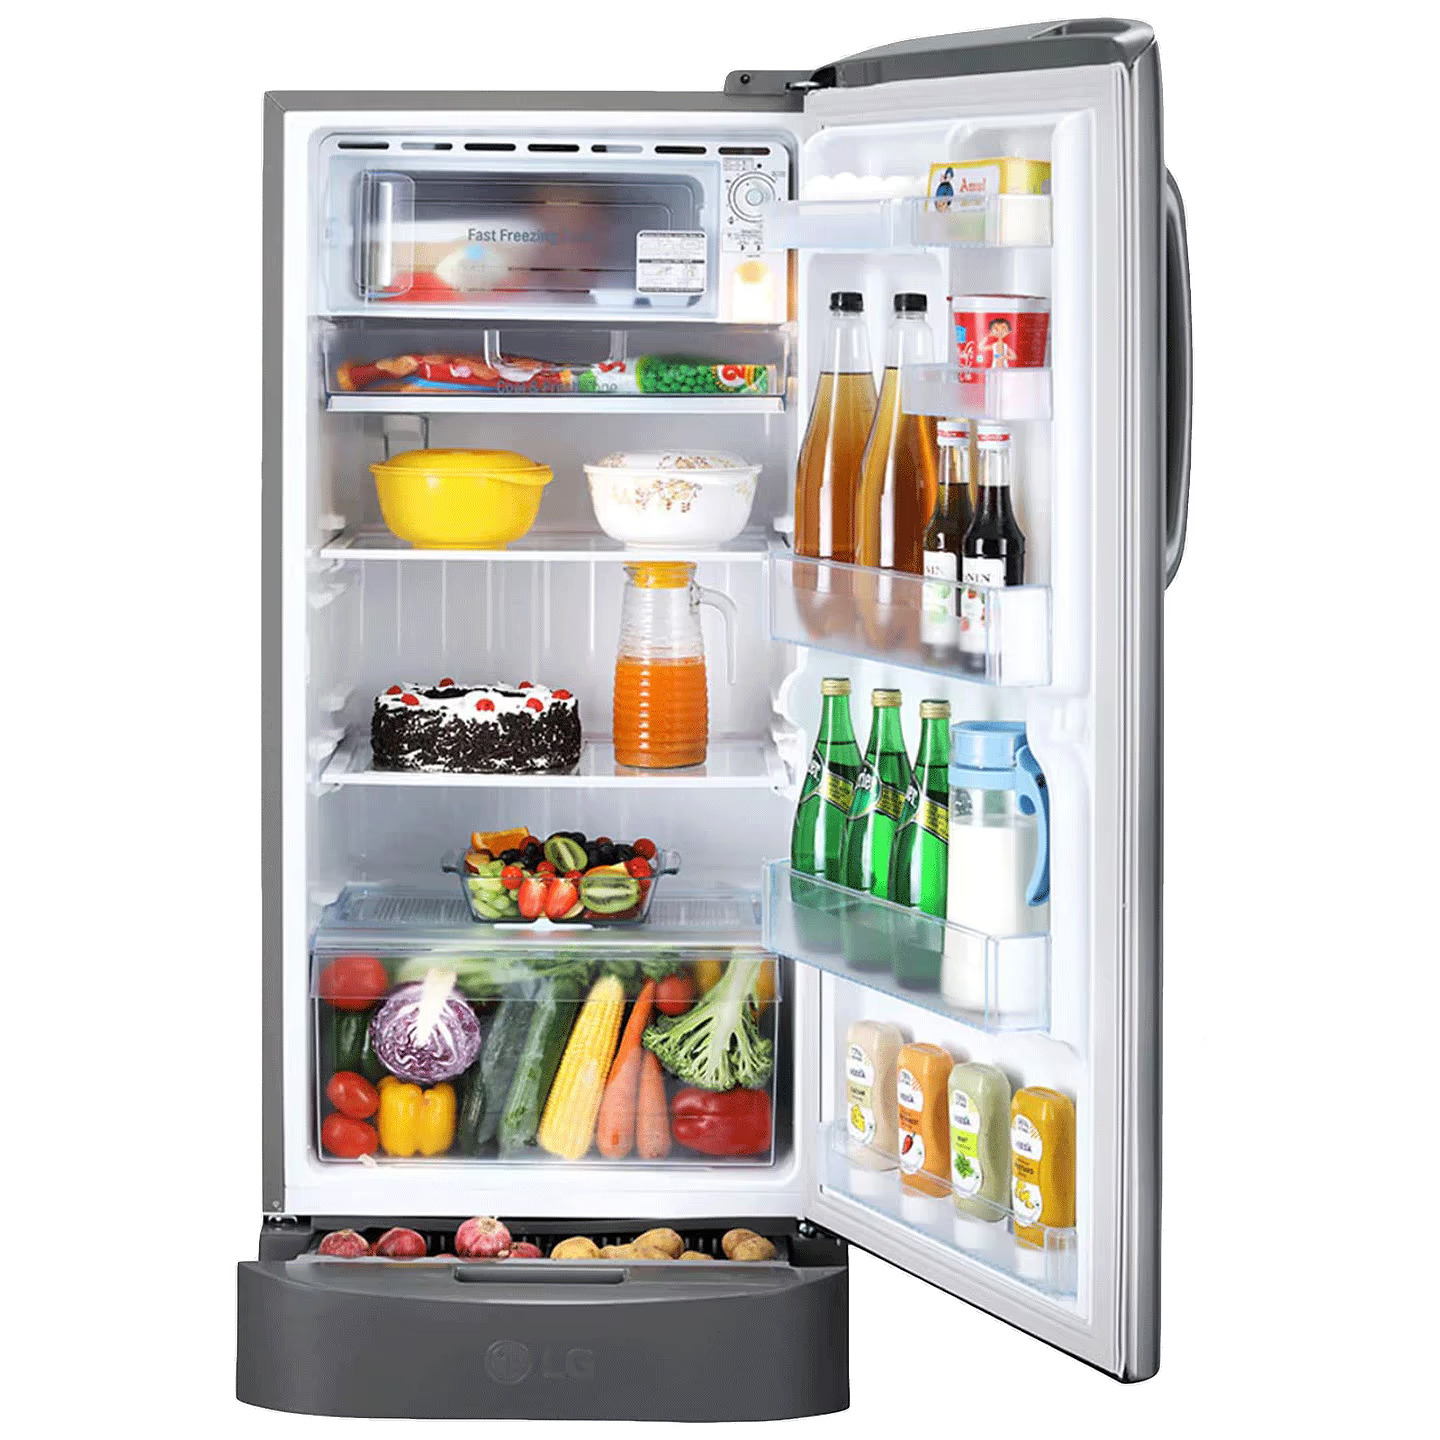 LG Refrigerator D221APZD 215L, Fastest In Ice Making, Toughened Glass Shelves